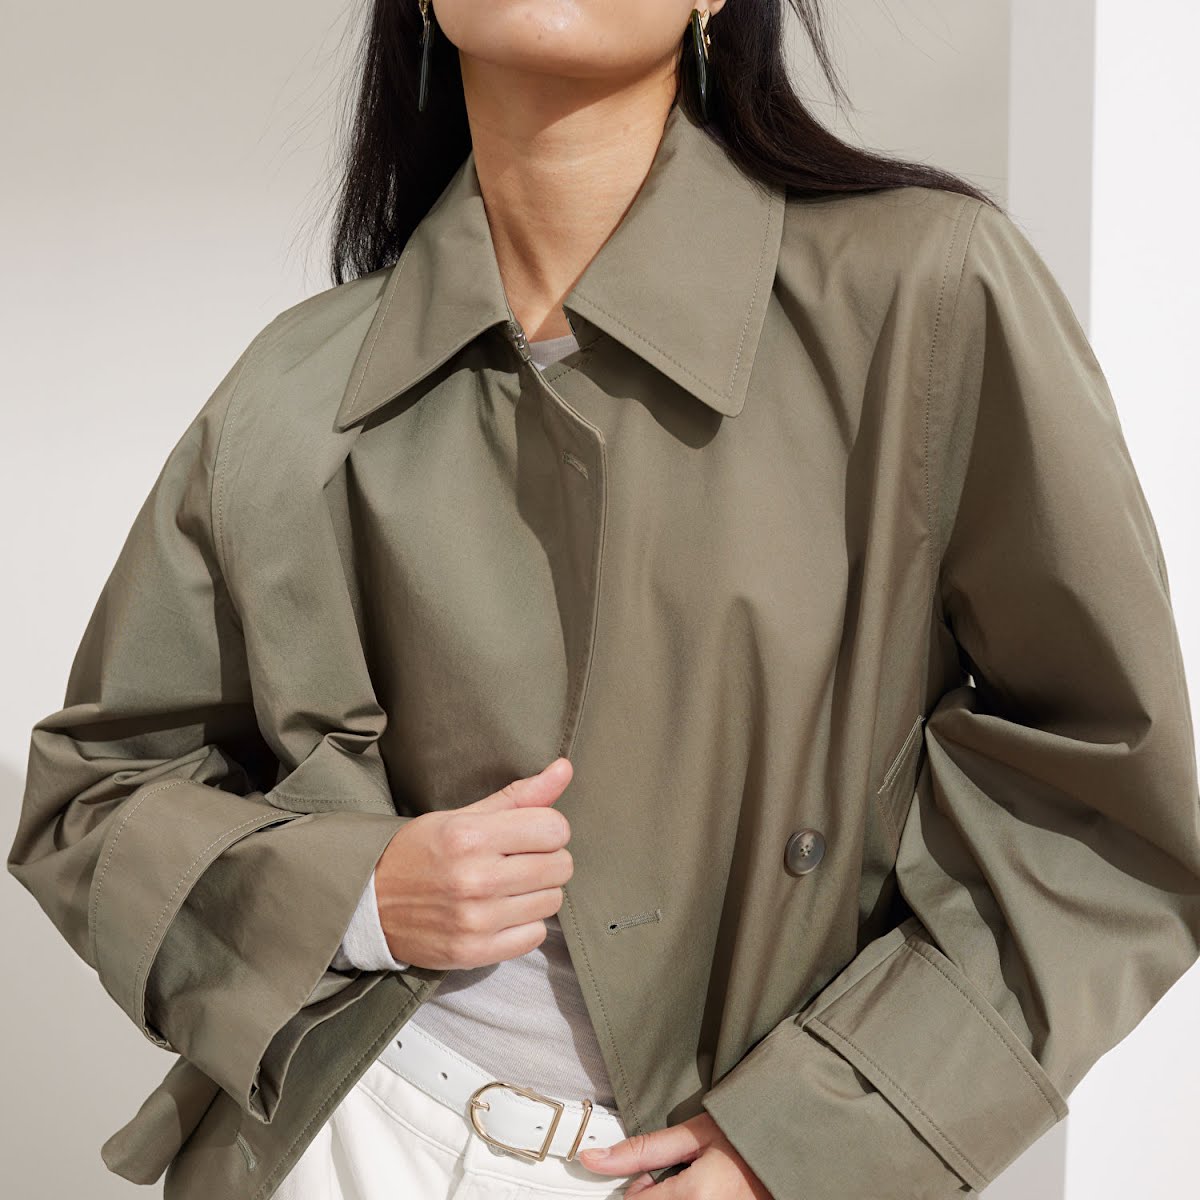 & Other Stories Short Trench Coat Jacket, €149